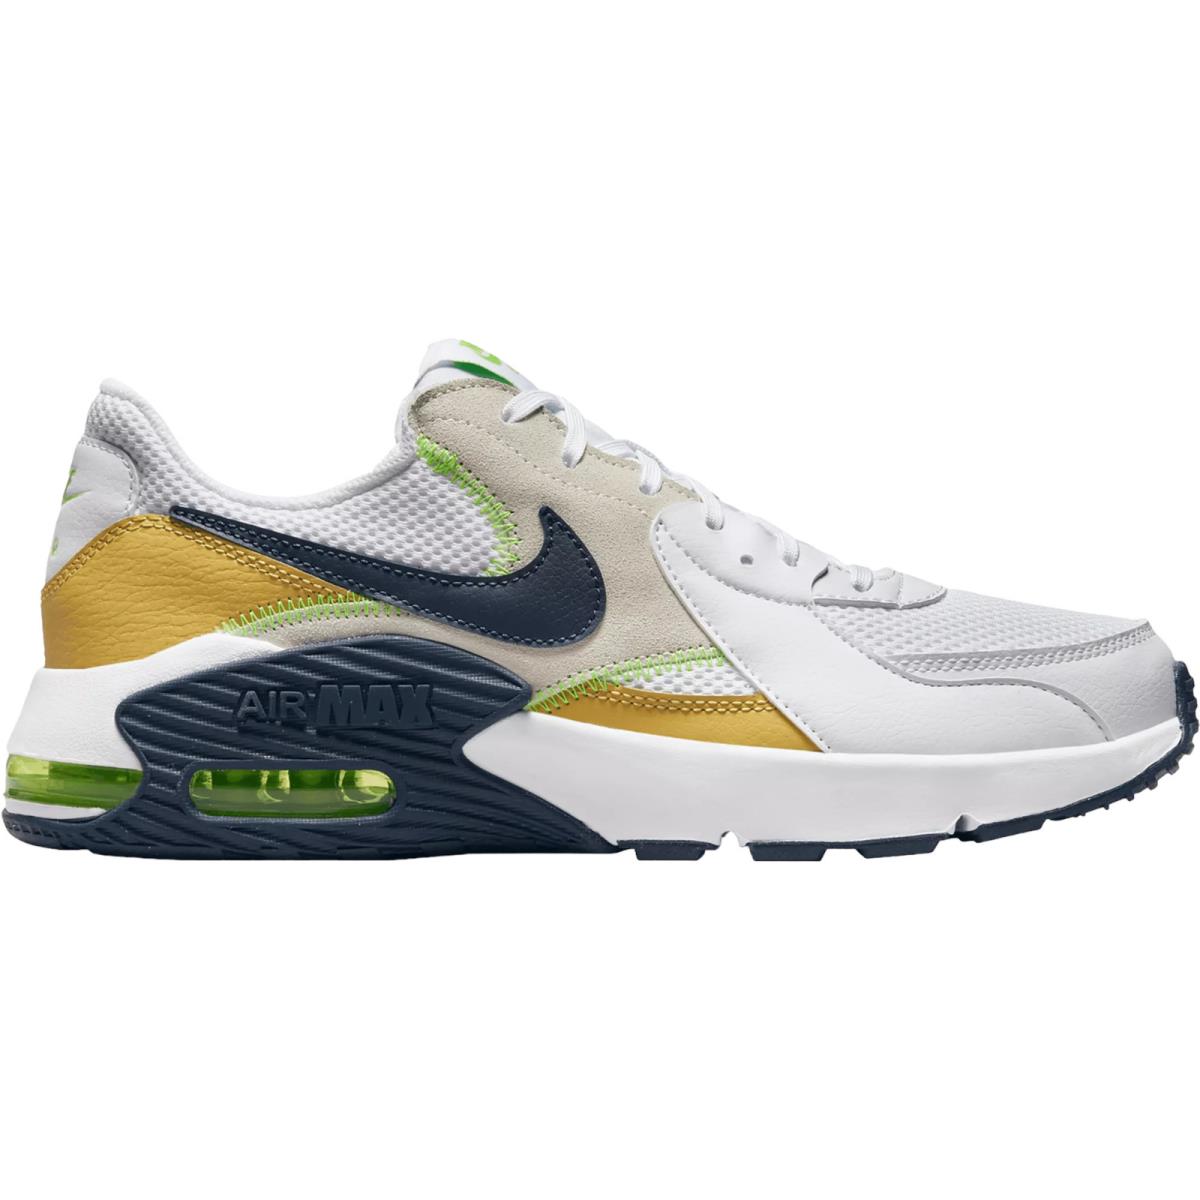 Nike Air Max Excee Men`s Casual Shoes All Colors US Sizes 7-14 White/Obsidian/Wheat Gold